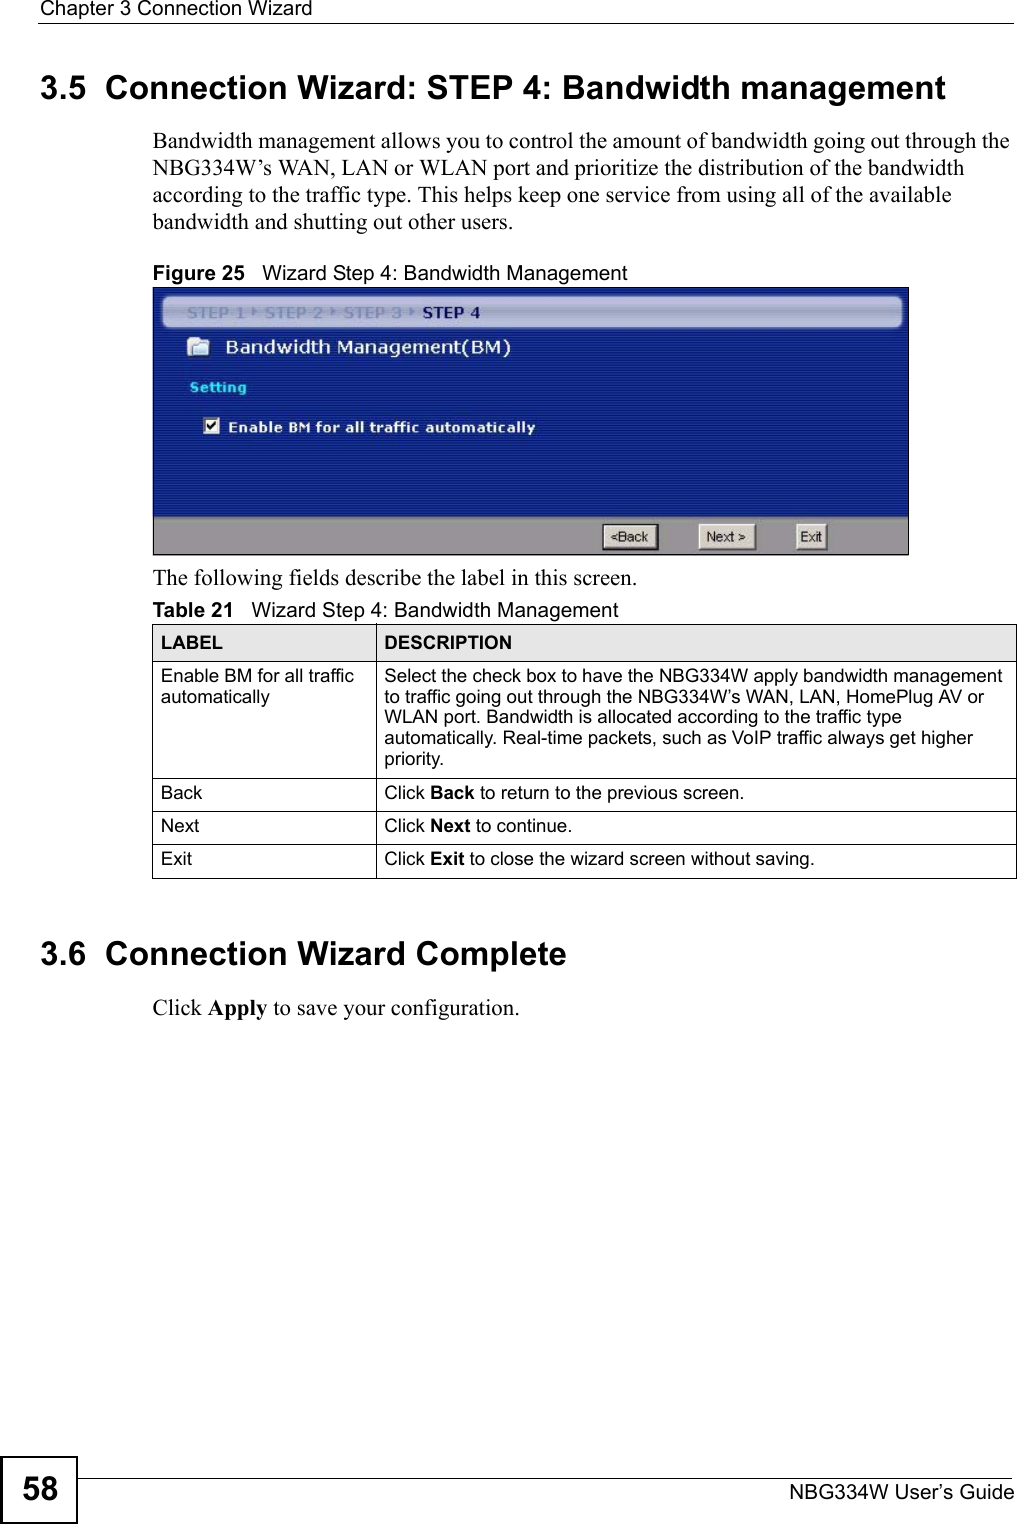 Chapter 3 Connection WizardNBG334W User’s Guide583.5  Connection Wizard: STEP 4: Bandwidth managementBandwidth management allows you to control the amount of bandwidth going out through the NBG334W’s WAN, LAN or WLAN port and prioritize the distribution of the bandwidth according to the traffic type. This helps keep one service from using all of the available bandwidth and shutting out other users.Figure 25   Wizard Step 4: Bandwidth Management The following fields describe the label in this screen.3.6  Connection Wizard CompleteClick Apply to save your configuration.Table 21   Wizard Step 4: Bandwidth ManagementLABEL DESCRIPTIONEnable BM for all traffic automaticallySelect the check box to have the NBG334W apply bandwidth management to traffic going out through the NBG334W’s WAN, LAN, HomePlug AV or WLAN port. Bandwidth is allocated according to the traffic type automatically. Real-time packets, such as VoIP traffic always get higher priority.Back Click Back to return to the previous screen.Next Click Next to continue. Exit Click Exit to close the wizard screen without saving.